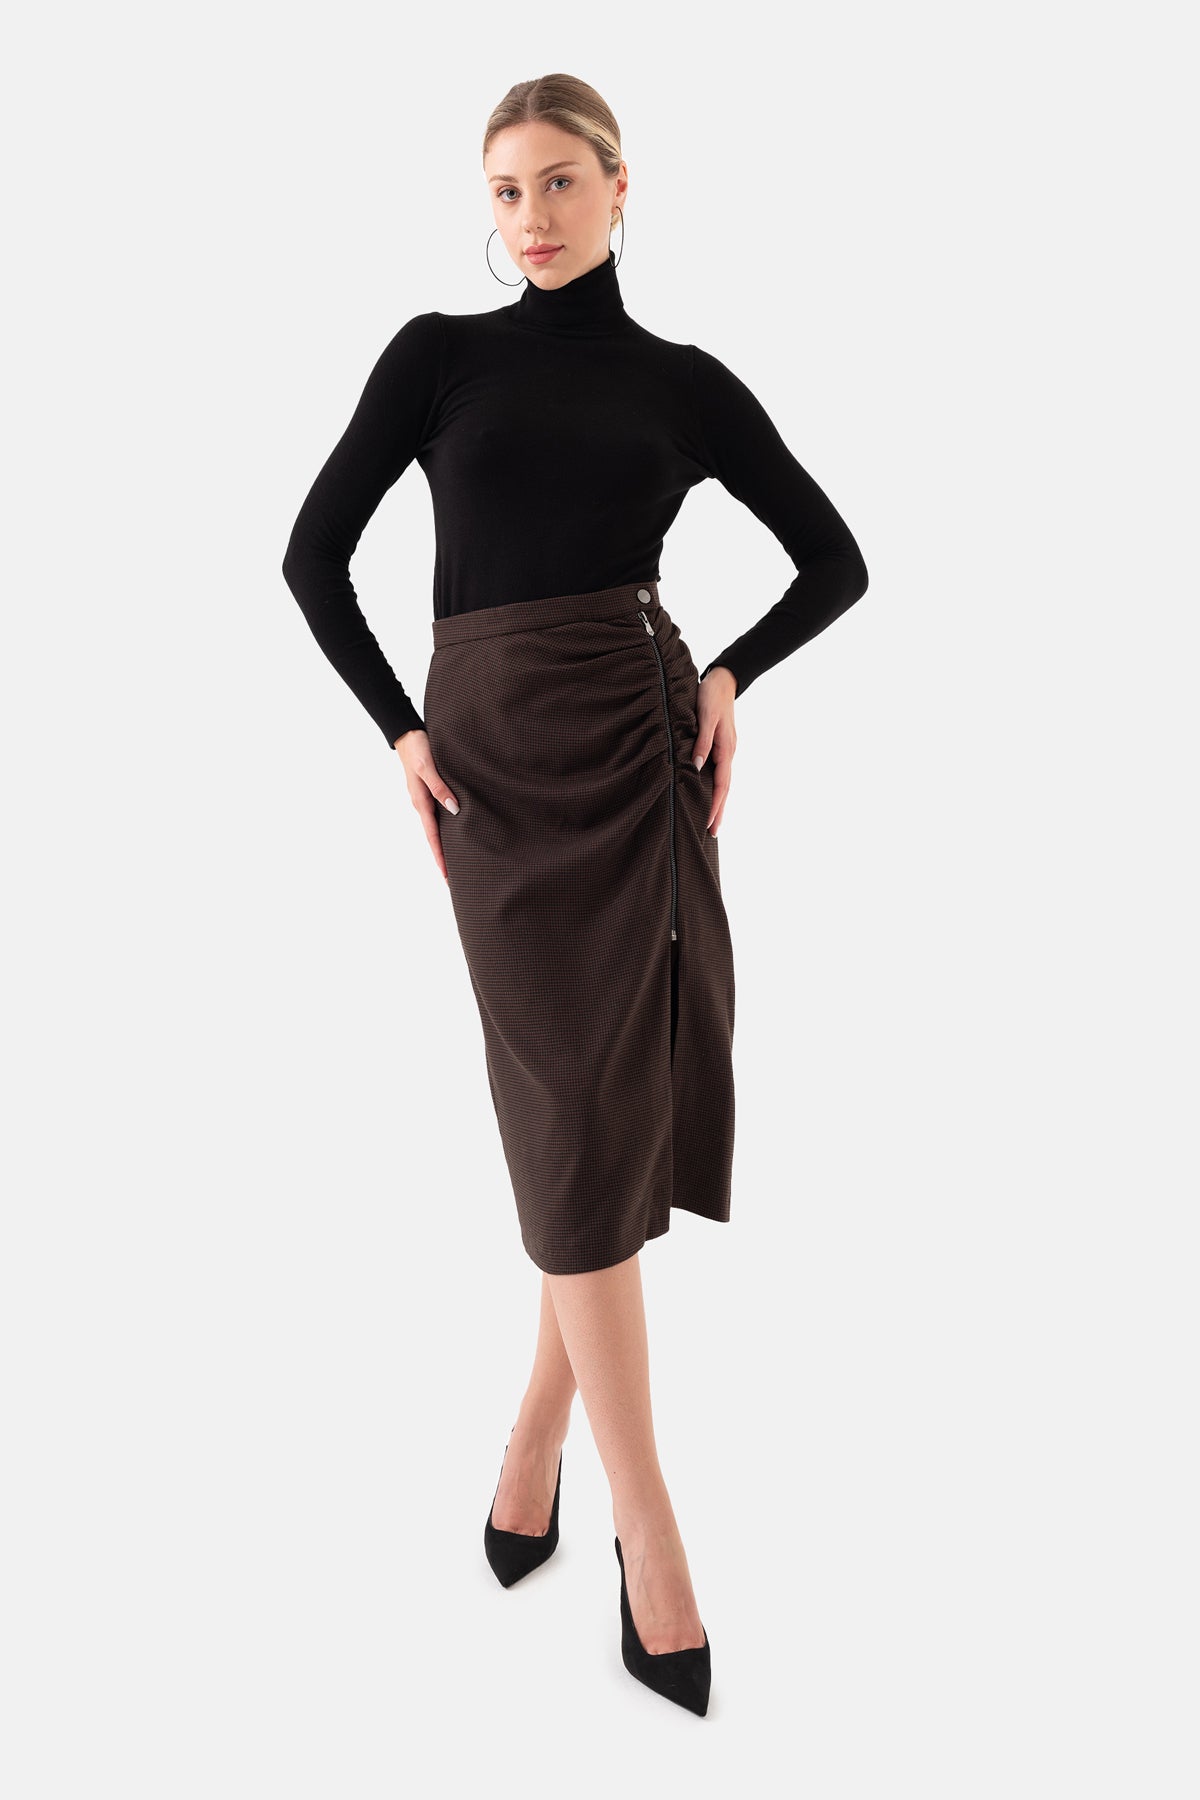 Brown Crowbar Pattern Women's Midi Skirt With Zipper On The Side